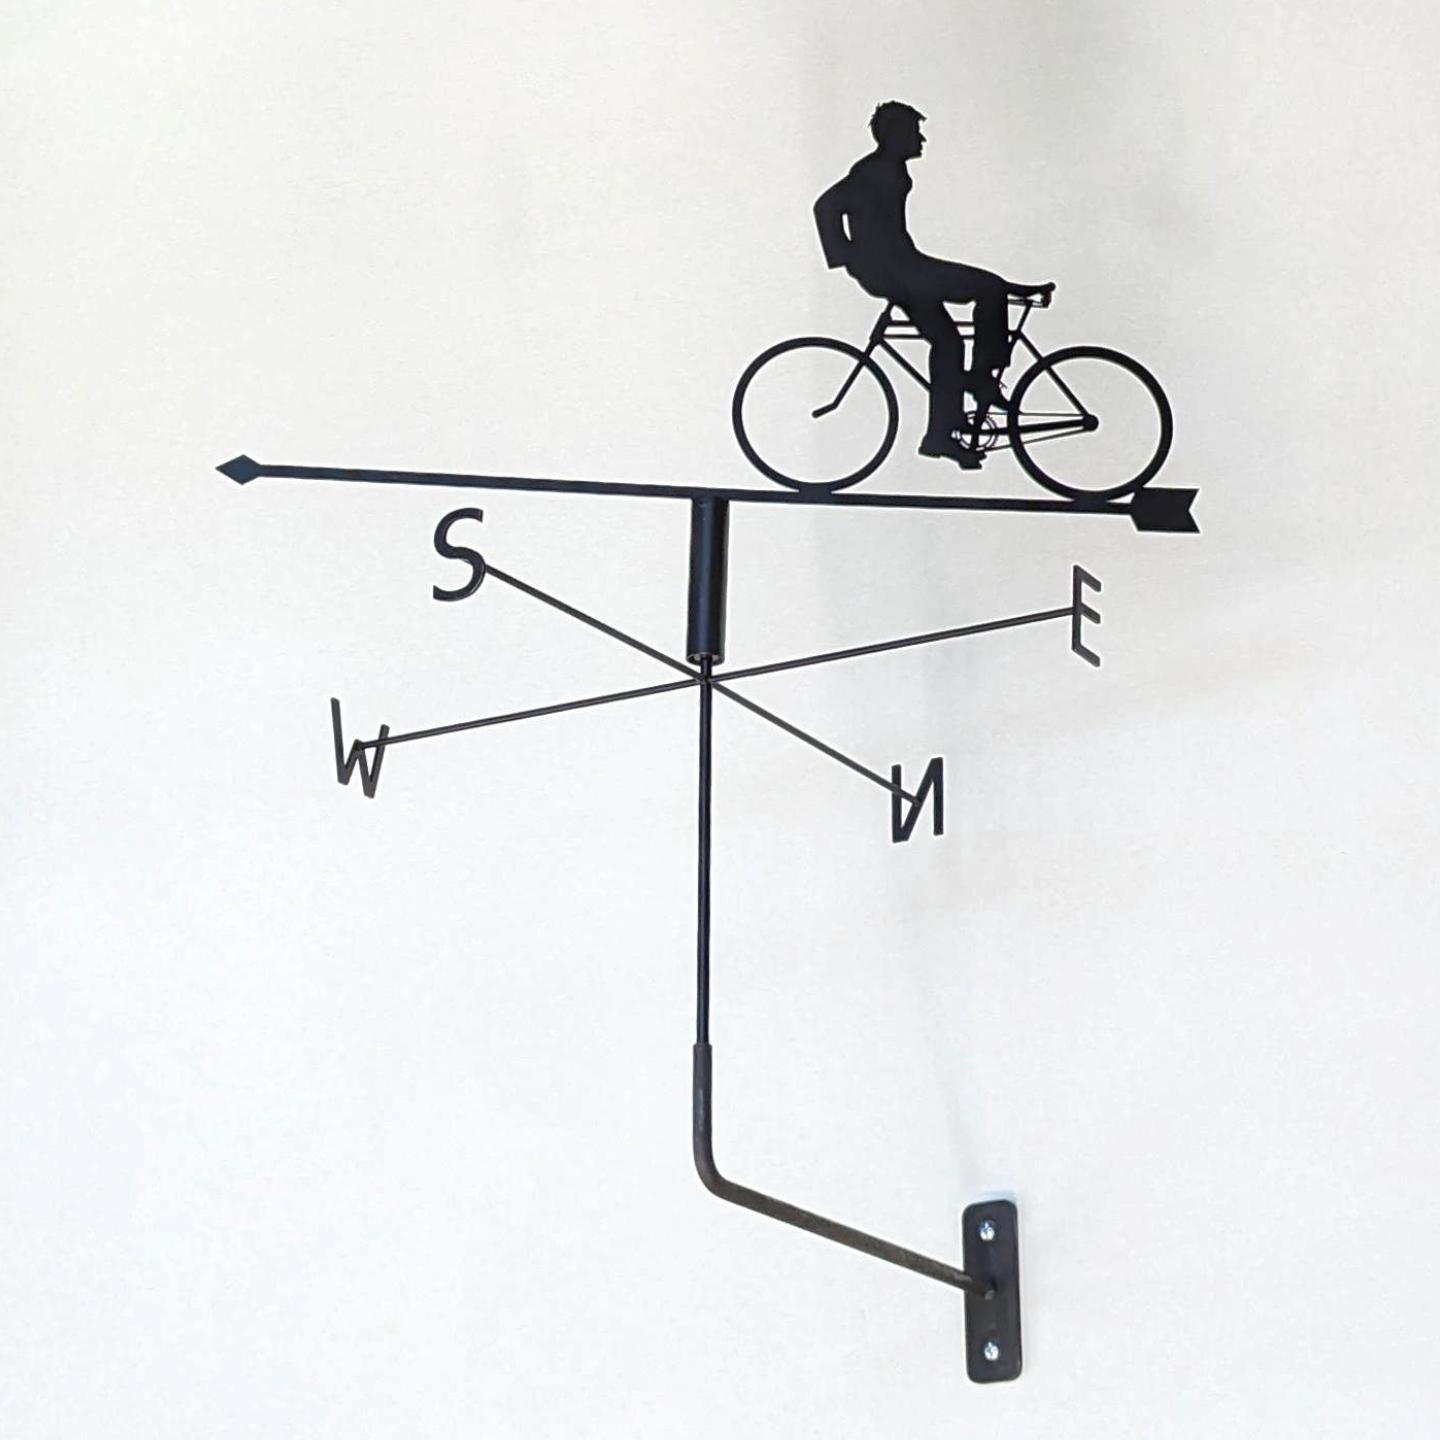 Beloved Vancouver artist Rodney Graham (1949-2022) challenged our perception of time and perspective with his Weather Vanes. Here at ADDITION, we're honoured to offer a playful interpretation, depicting Graham riding a bicycle, defying convention in 